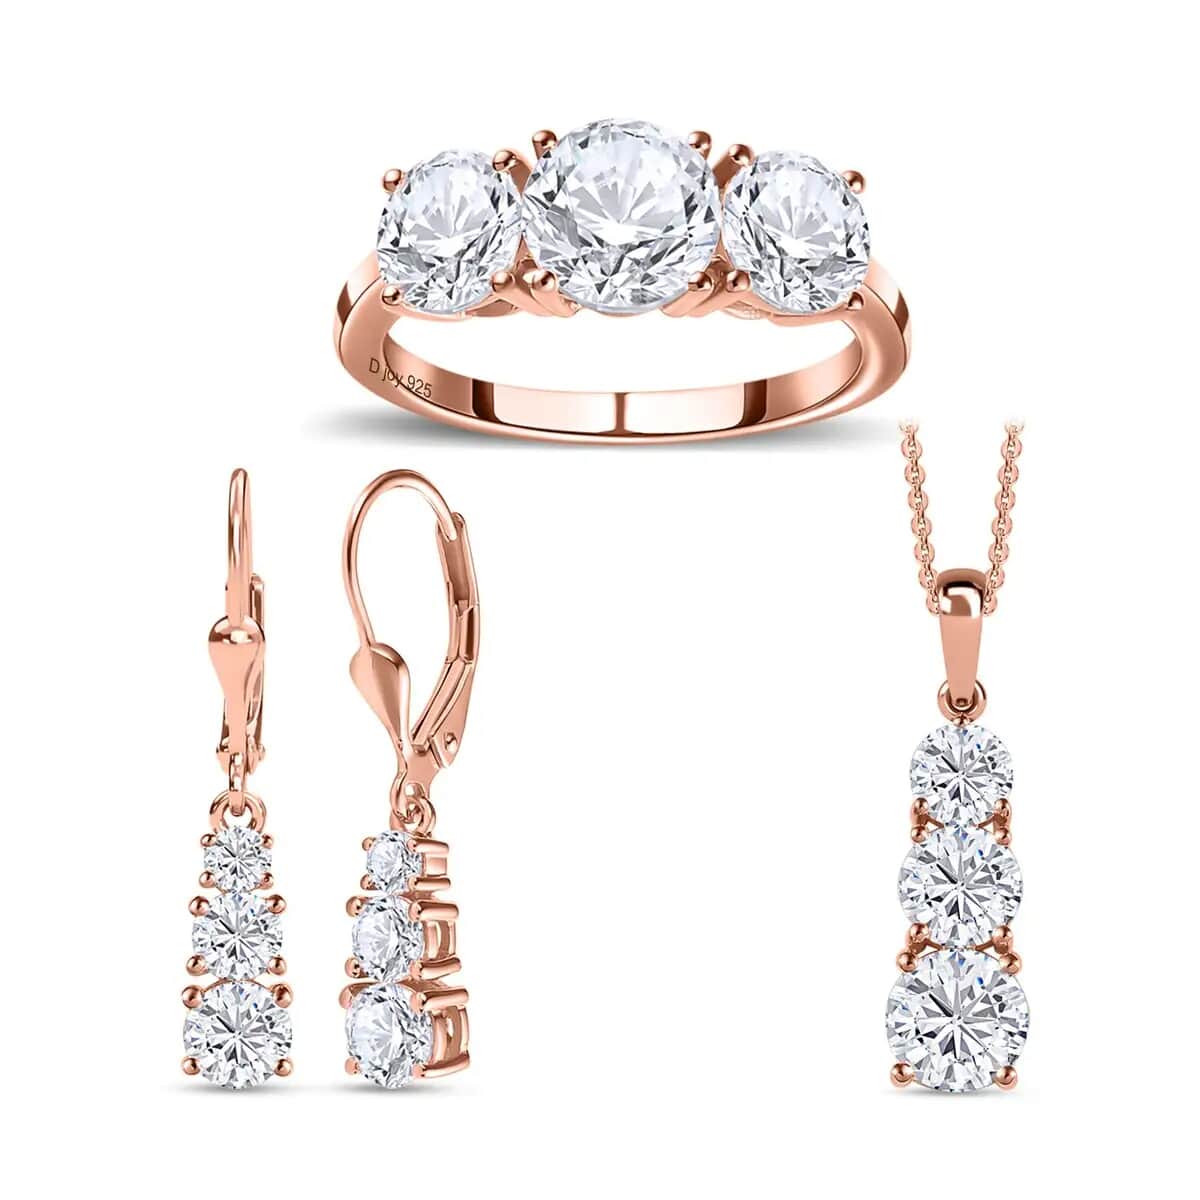 Moissanite 6.75 ctw Jewelry Set of Lever Back Earrings, Trilogy Ring and Trilogy Pendant Necklace, Vermeil Rose Gold Over Sterling Silver Jewelry Set, Moissanite Gifts For Her image number 0